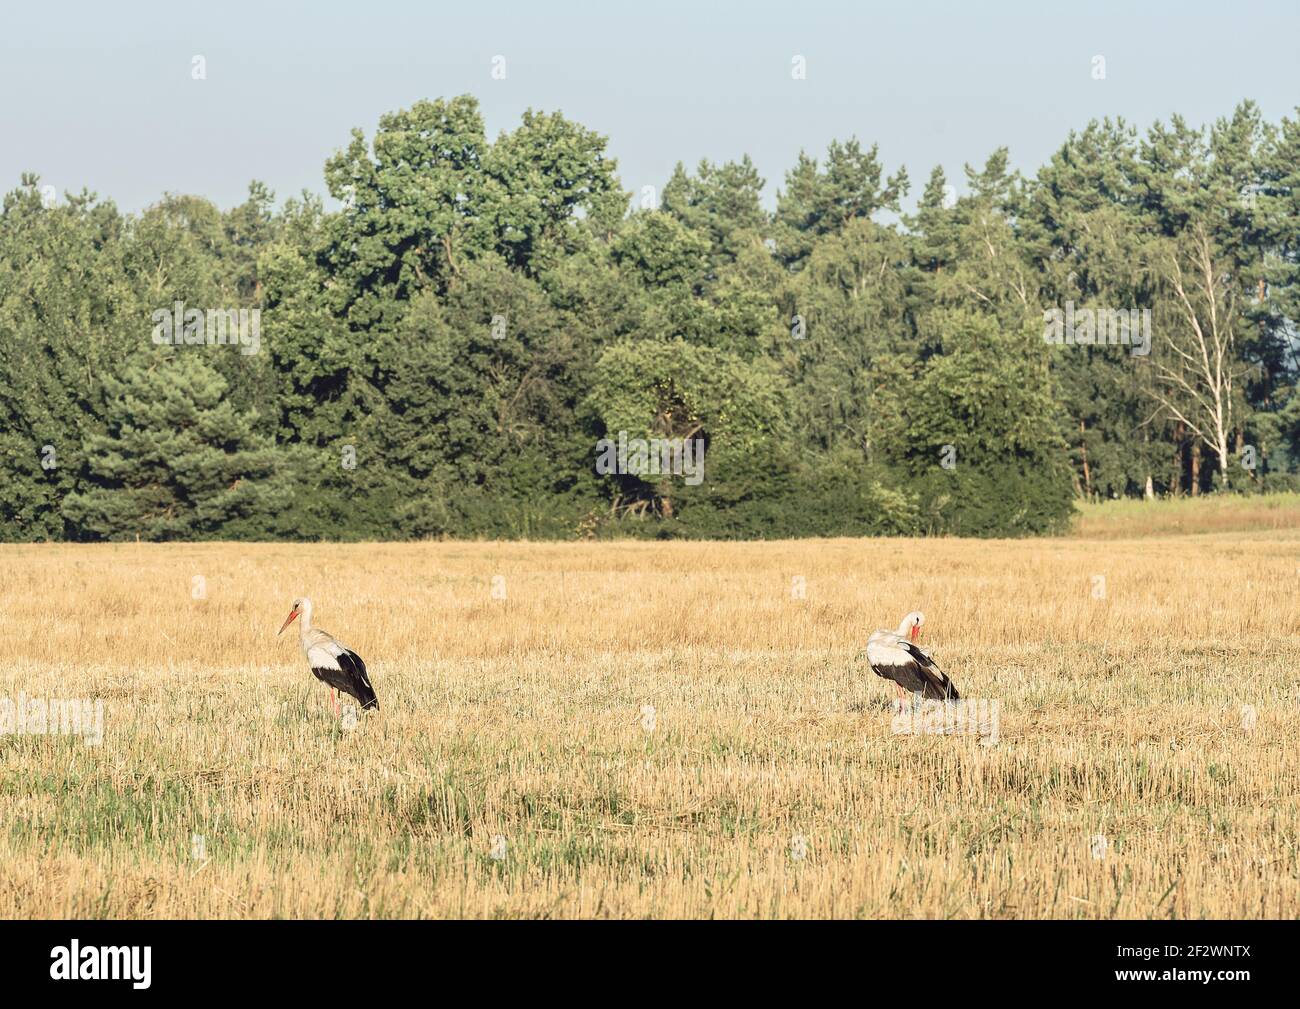 Storks in the field. Fragment of a field of harvested wheat. Stock Photo